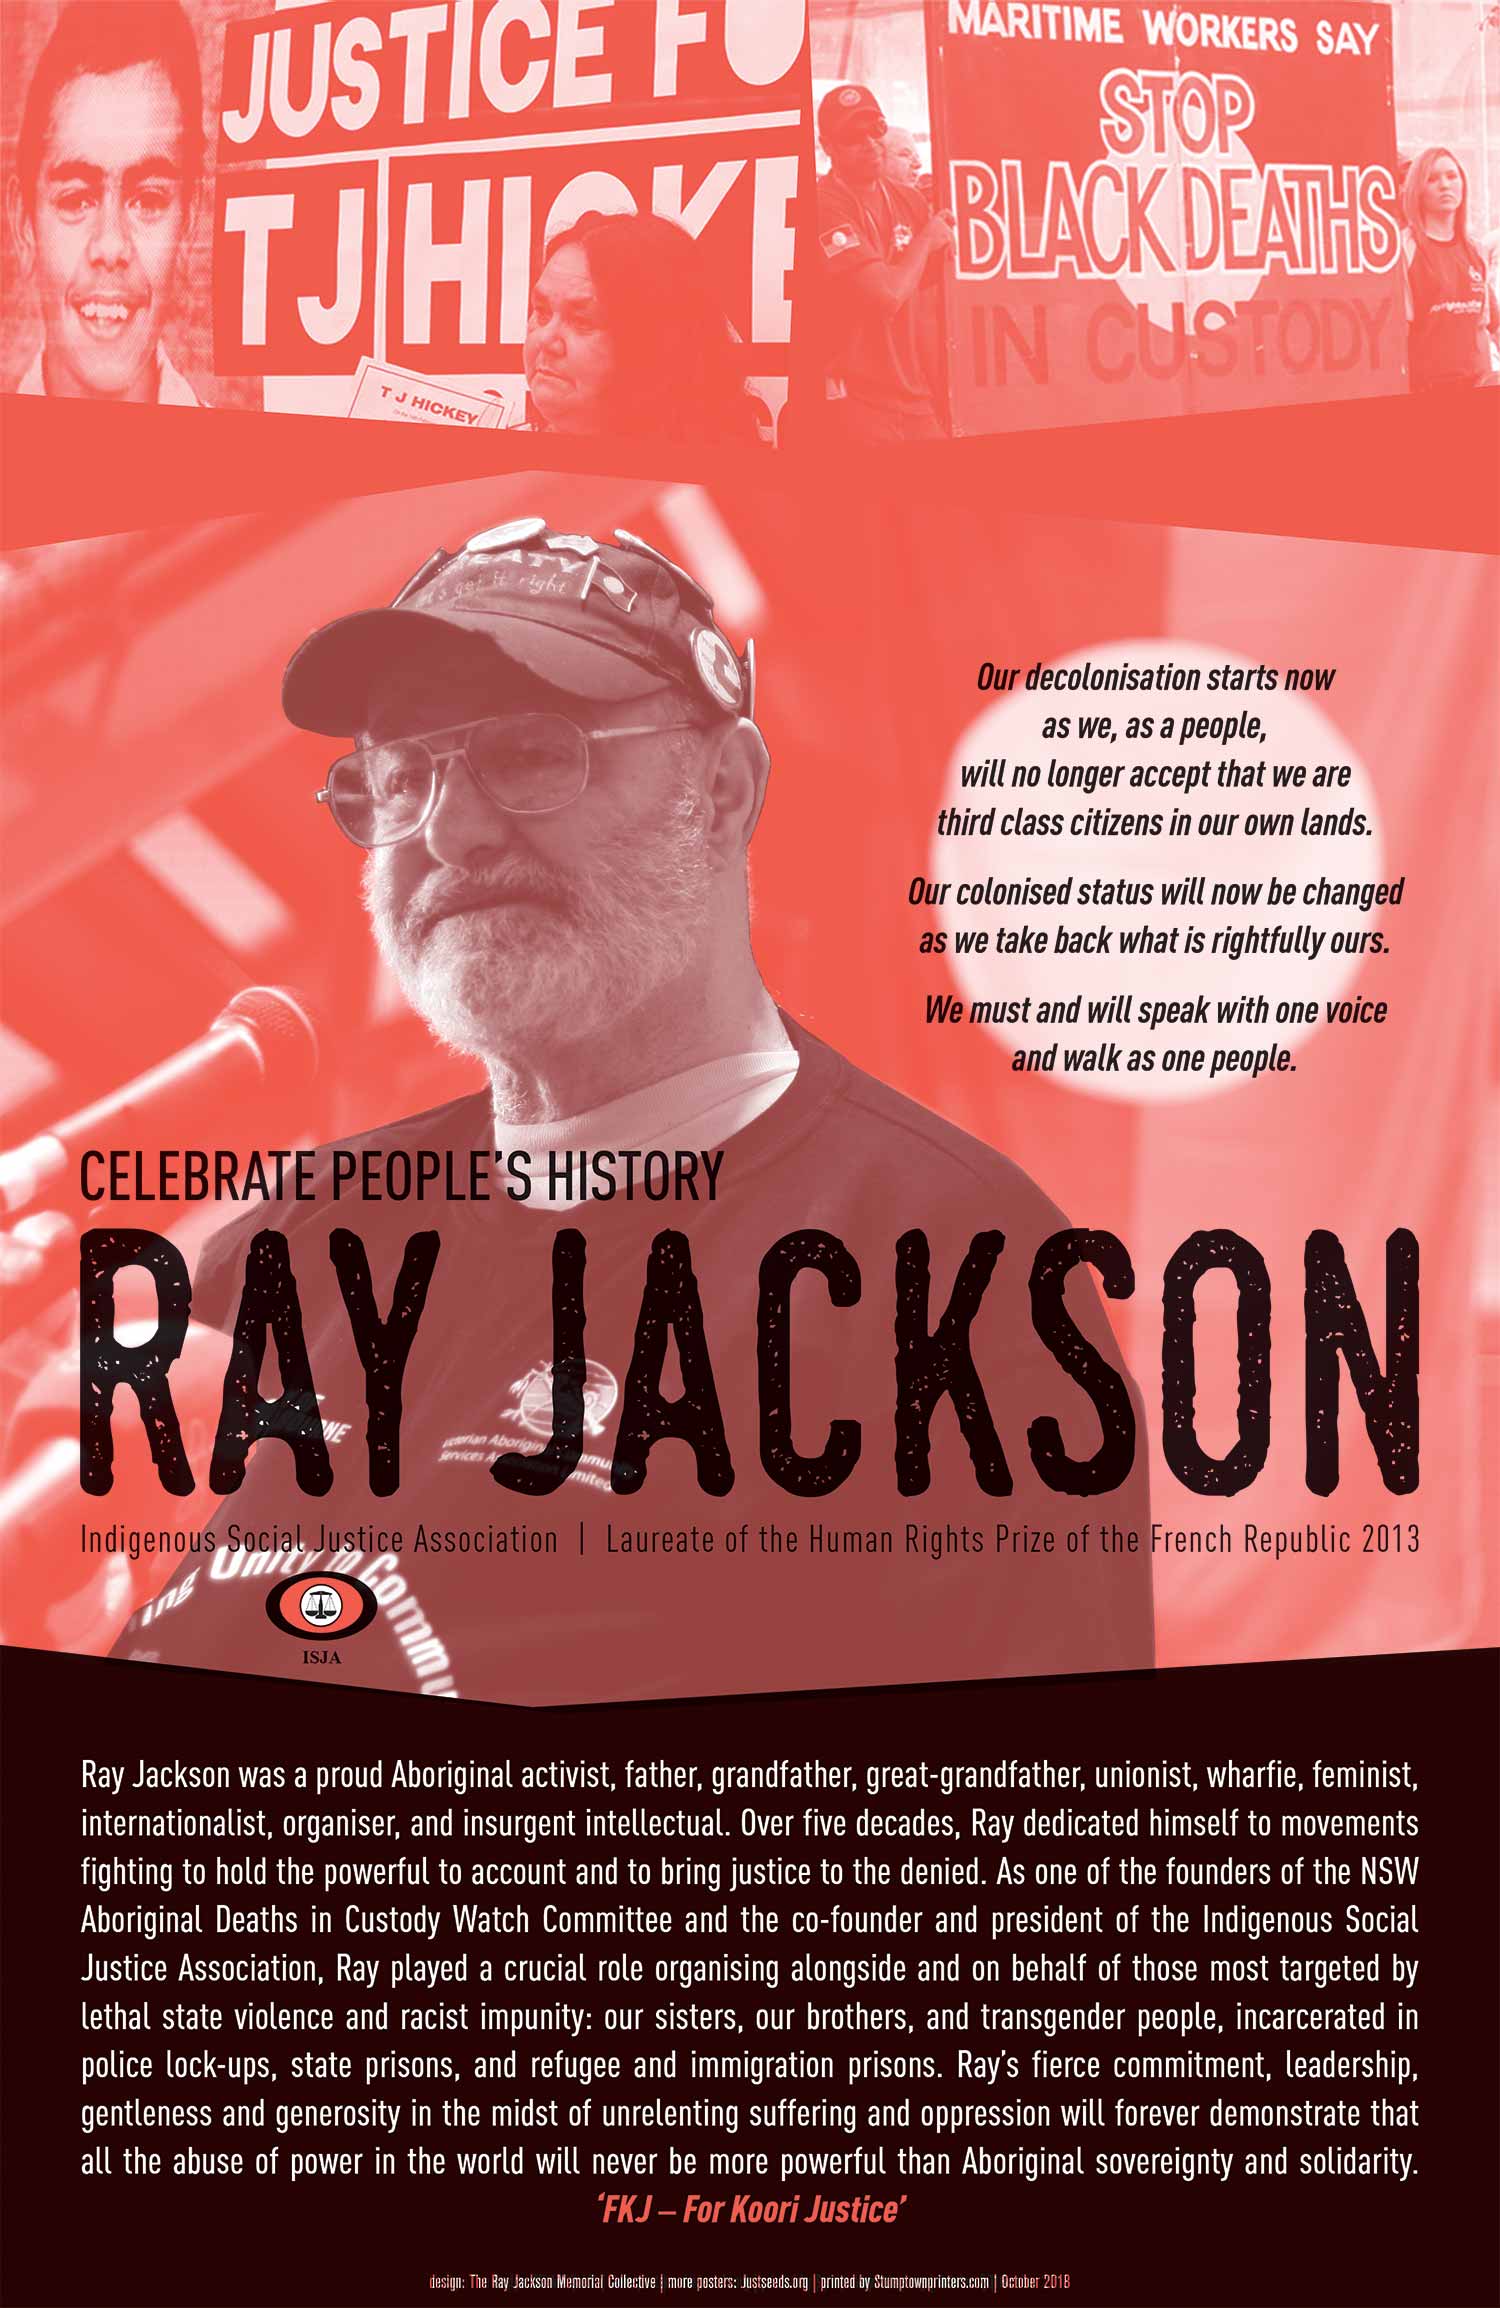 A poster for the Indigenous Social Justice Association with overlaid text that reads Celebrate Peoples History - Ray Jackson. The background has photographs of placards from protests that read Justice for TJ Hickey and Maritime Workers Say Stop Black Deaths in Custody. The foreground is a photograph of Uncle Ray speaking into a microphone and wearing a cap covered in pins and badges.